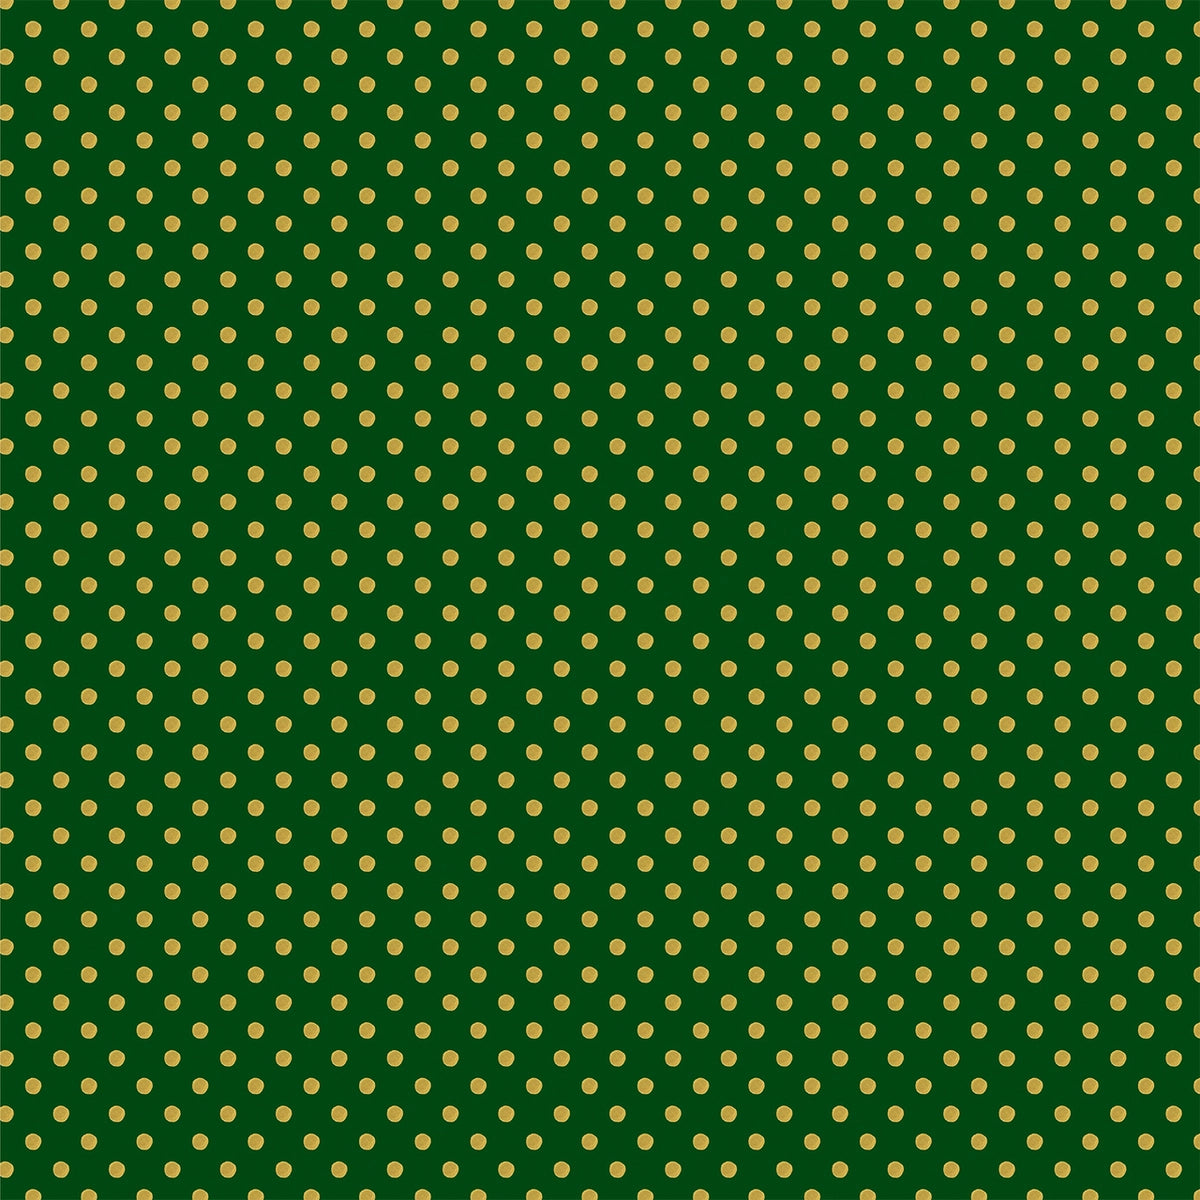 Side B - gold polka dots on a forest green background